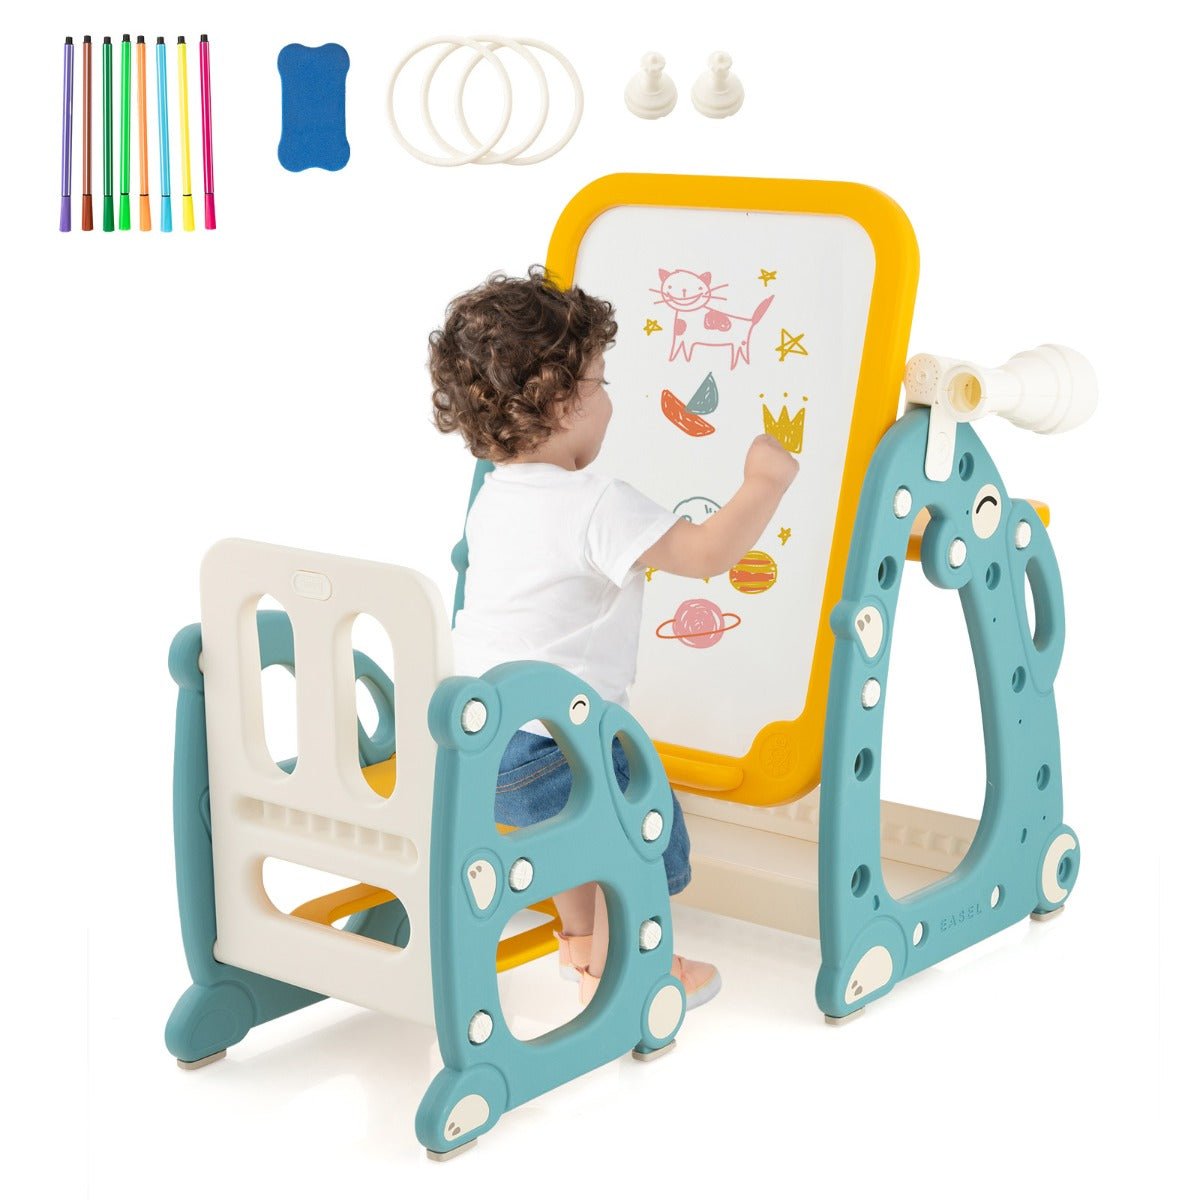 Kids Art and Play Zone with Adjustable Easel - Kids Mega Mart